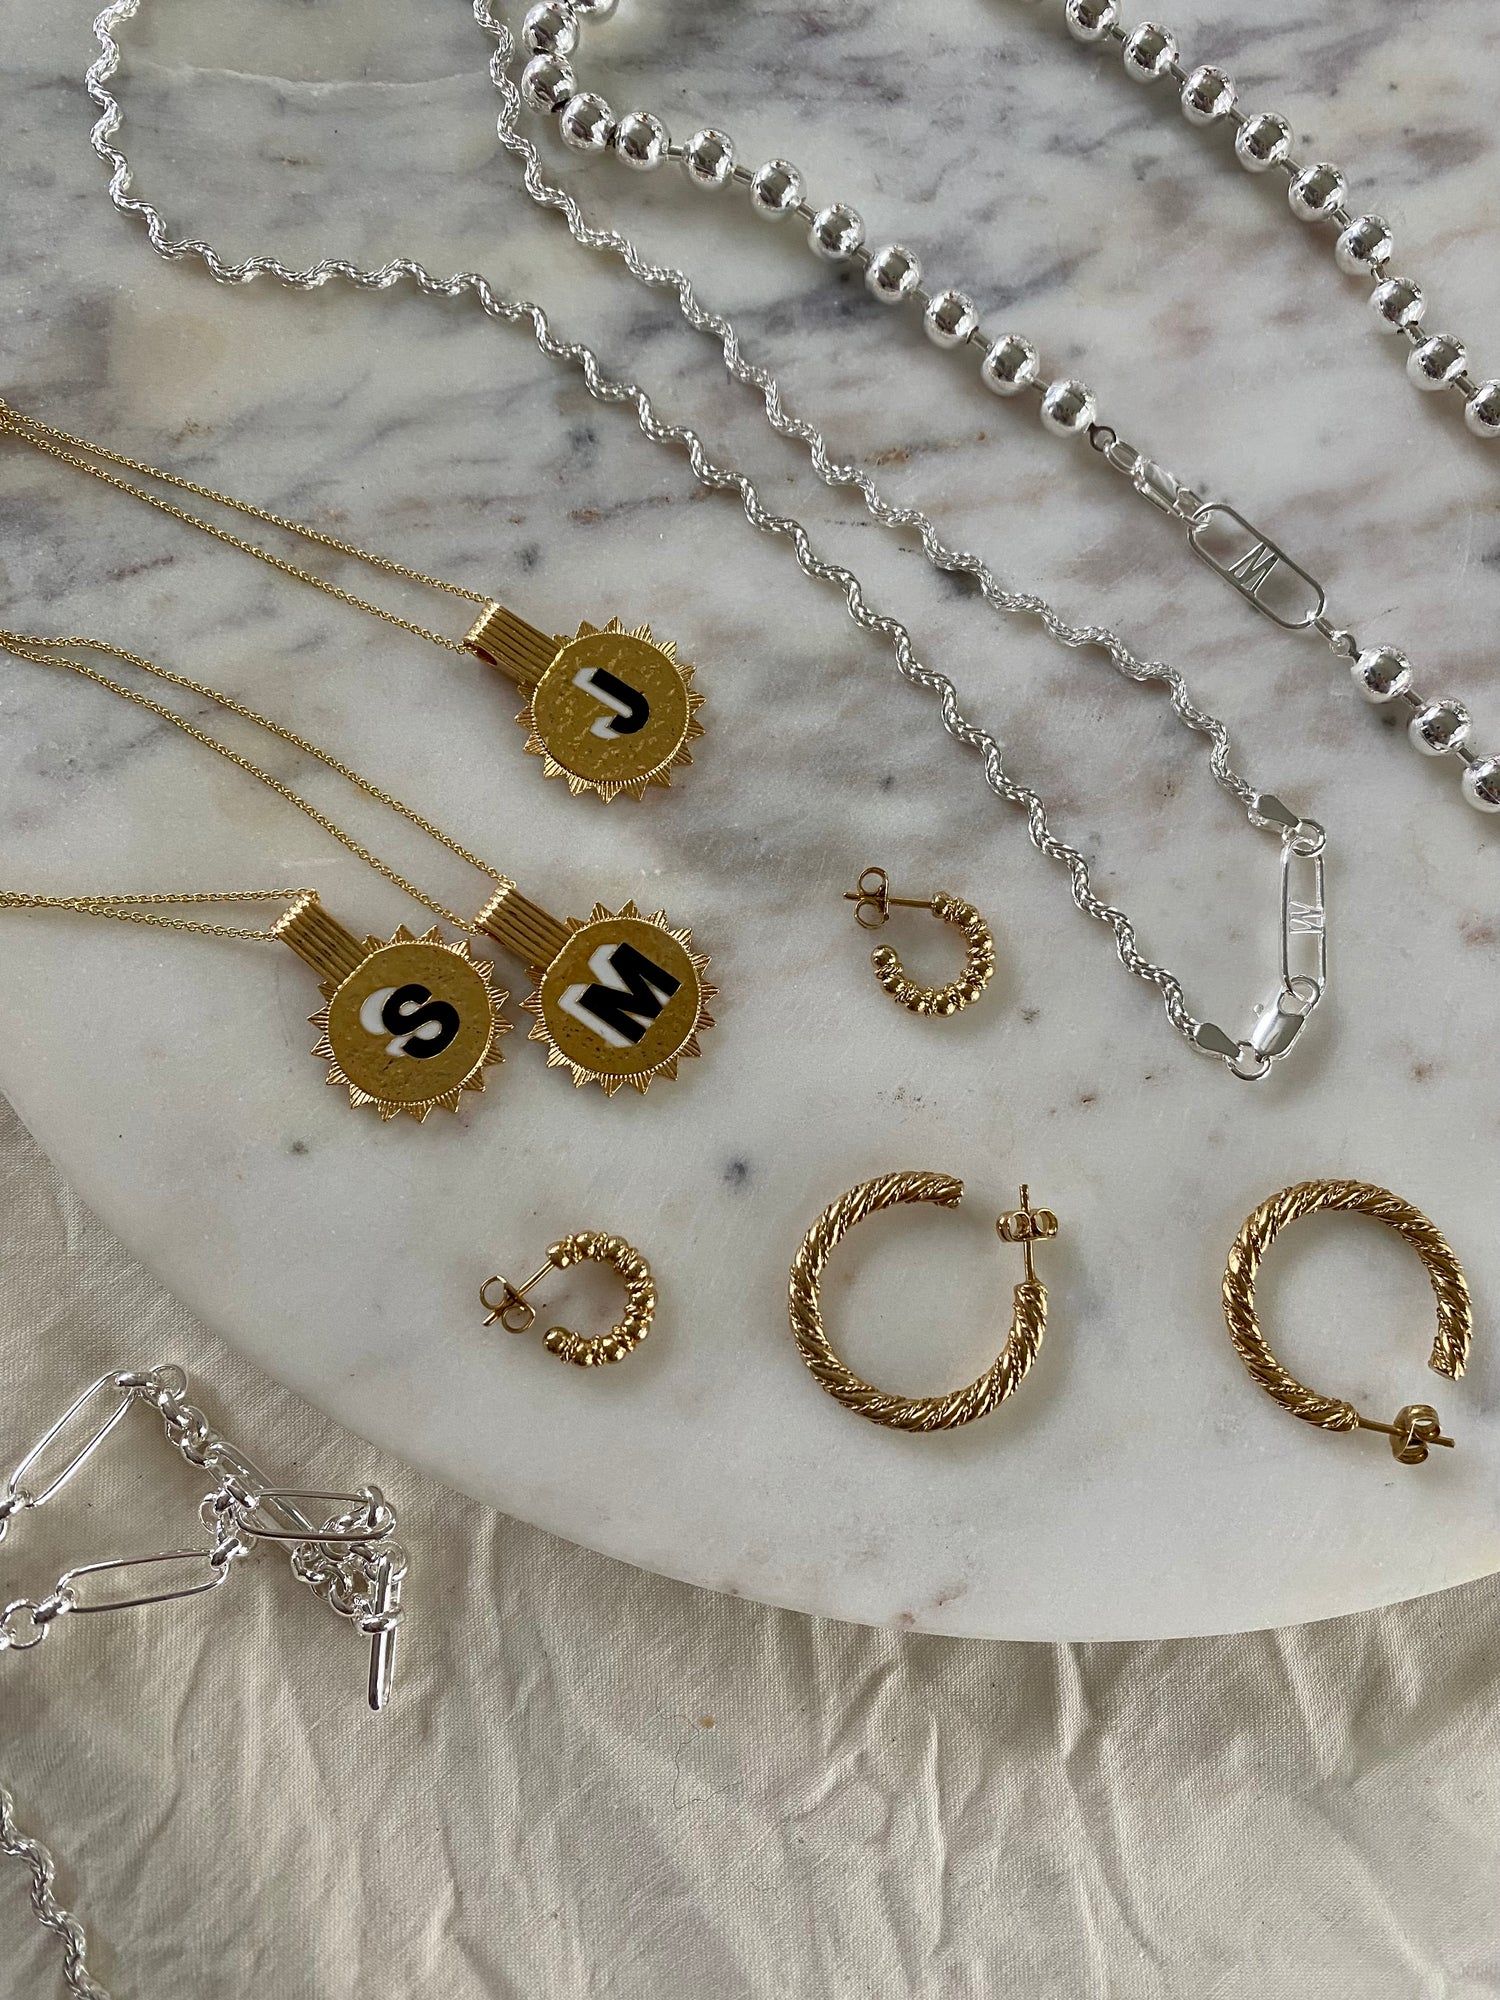 A collection of WALD Berlin jewelry on a marble table in Germany's capital city, Berlin.